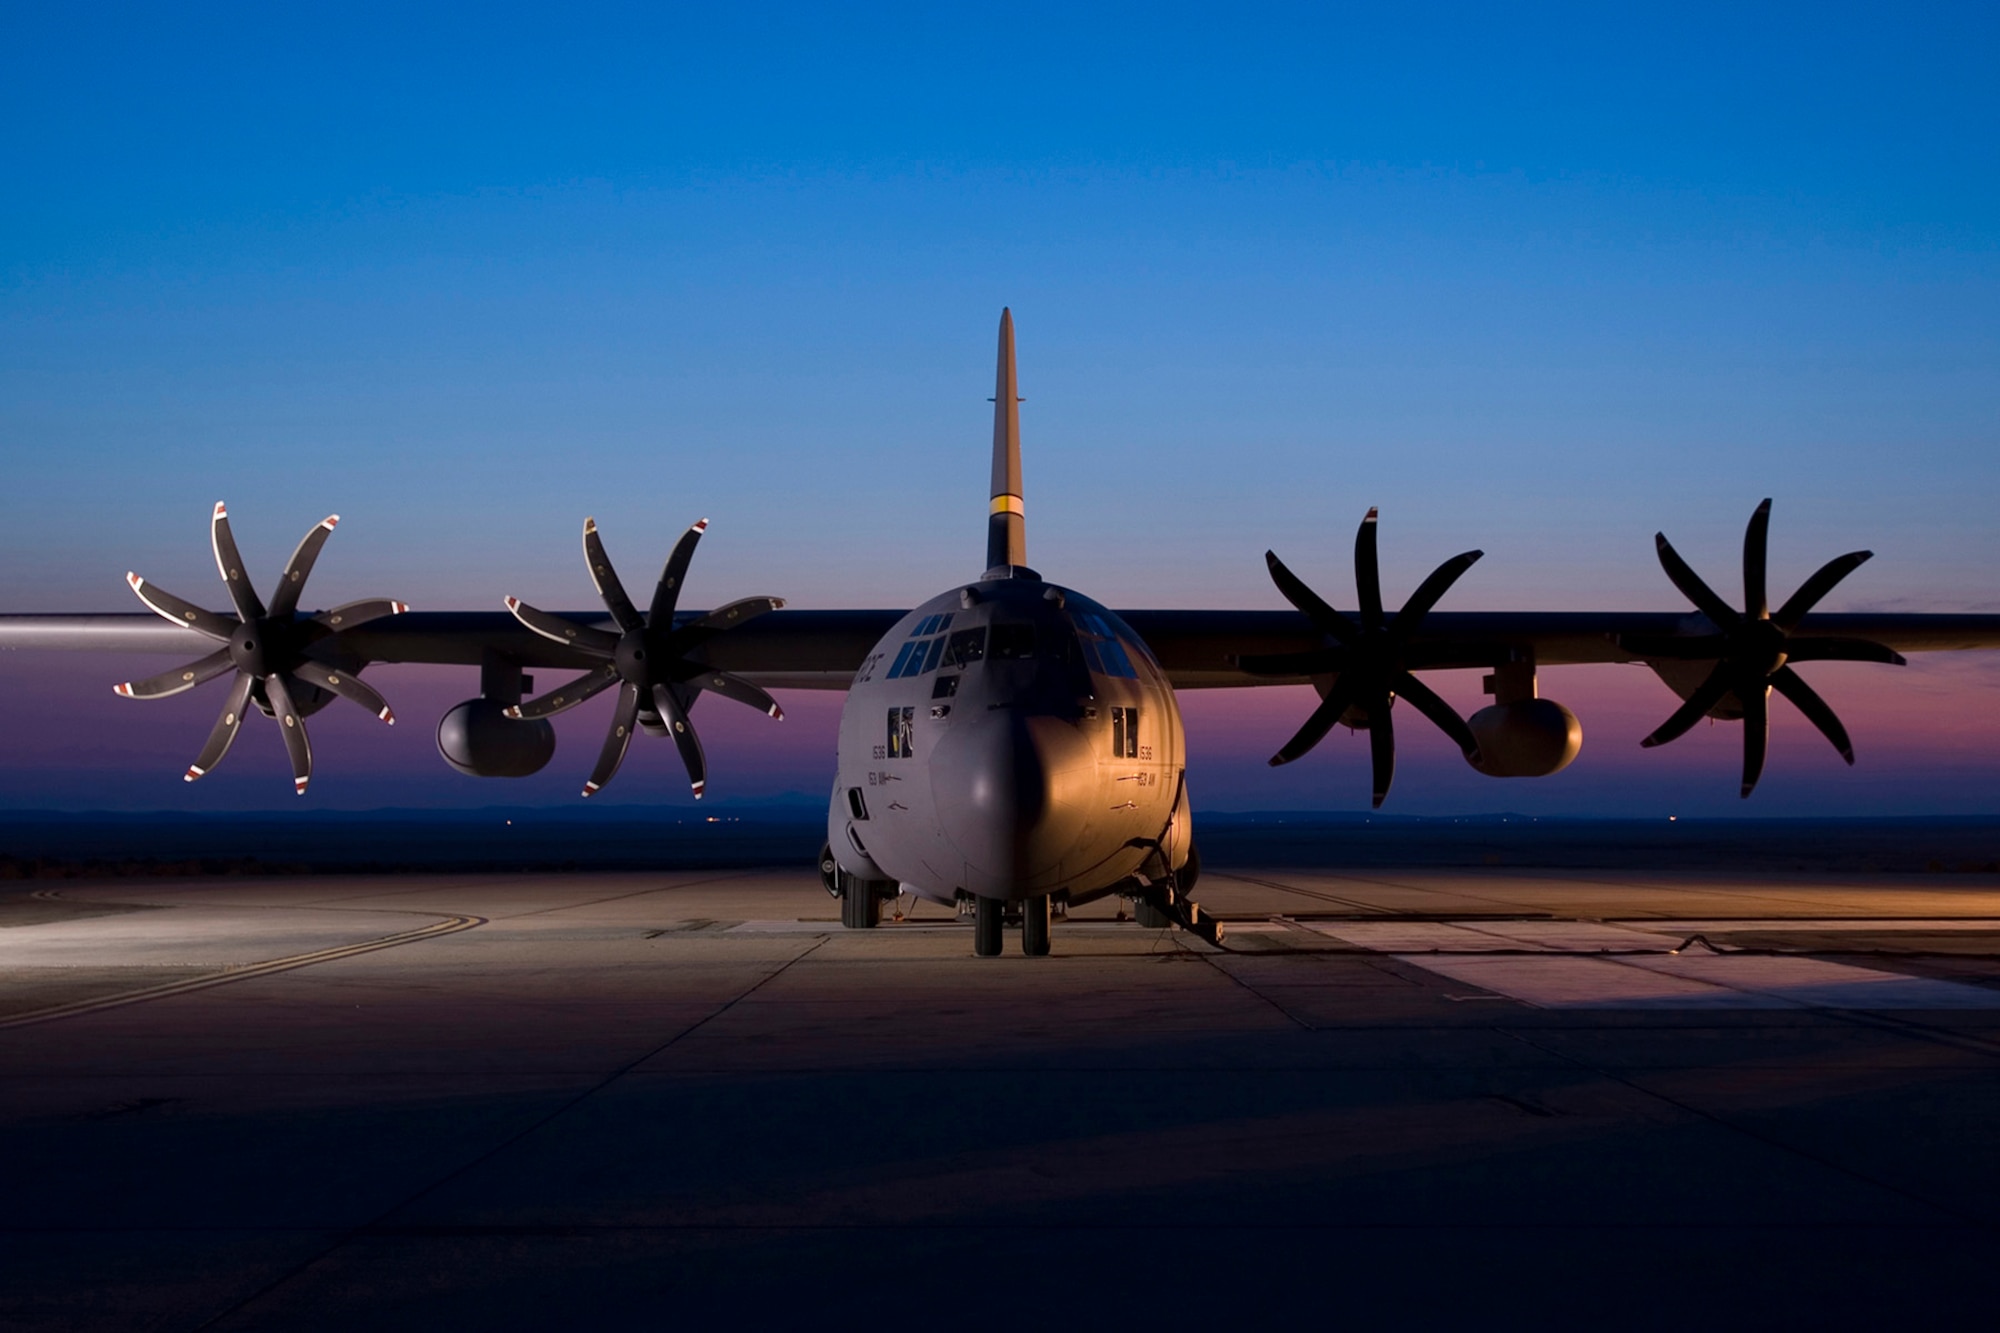 A C-130H Hercules aircraft assigned to the 153rd Airlift Wing, Wyoming Air National Guard is seen parked on the ramp at Edwards AFB in California. The C-130 is modified with an Electronic Propeller Control System and eight-bladed propeller system. (Courtesy photo)